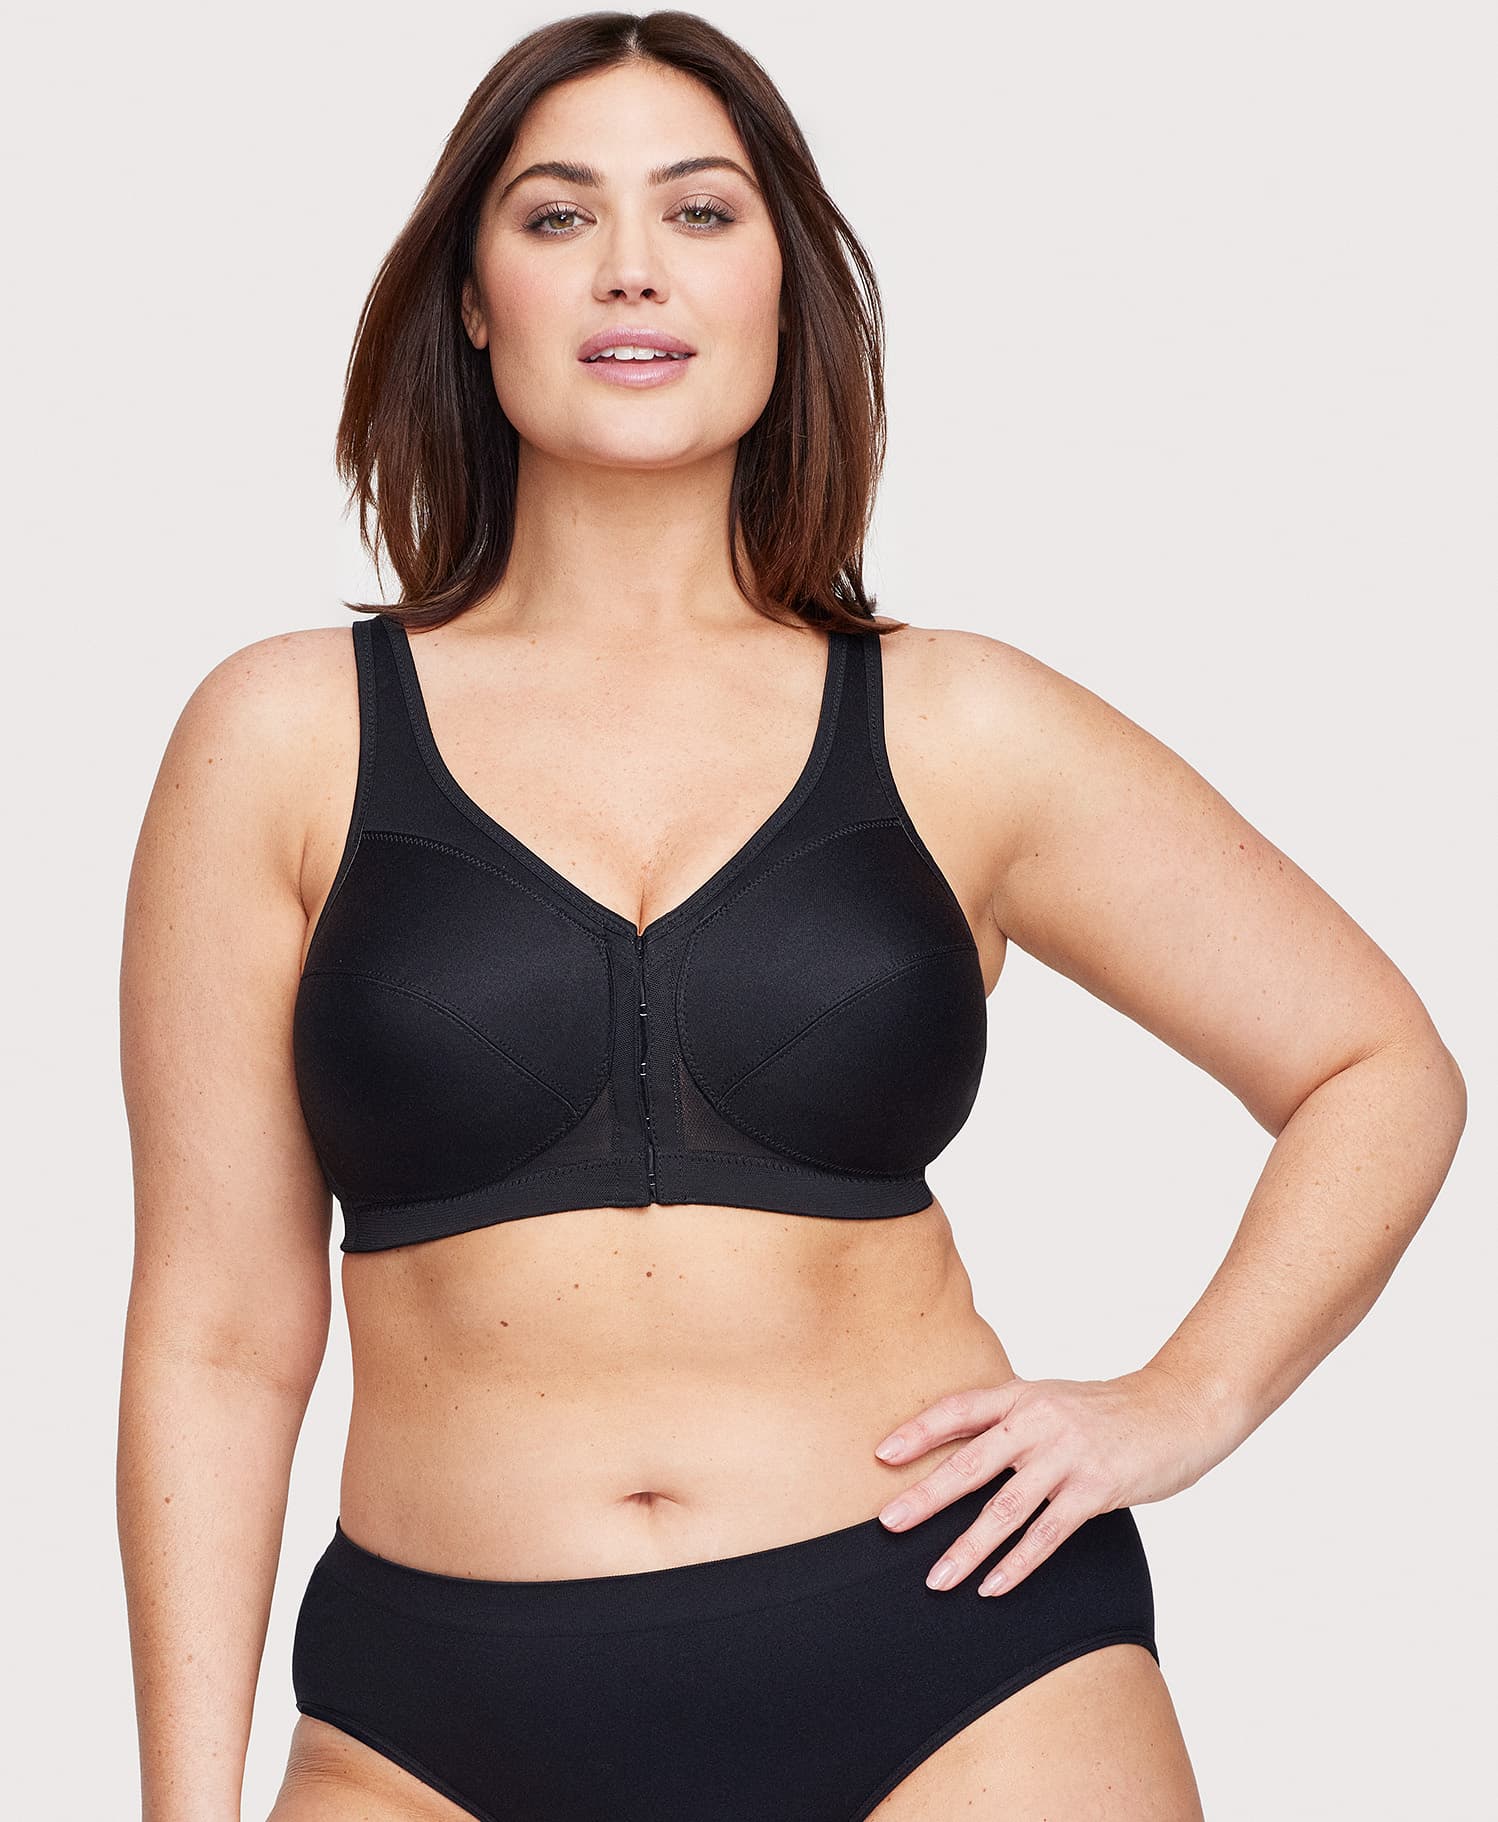 Best Posture Correctors & Posture Supporting Bras for Everyday Wear